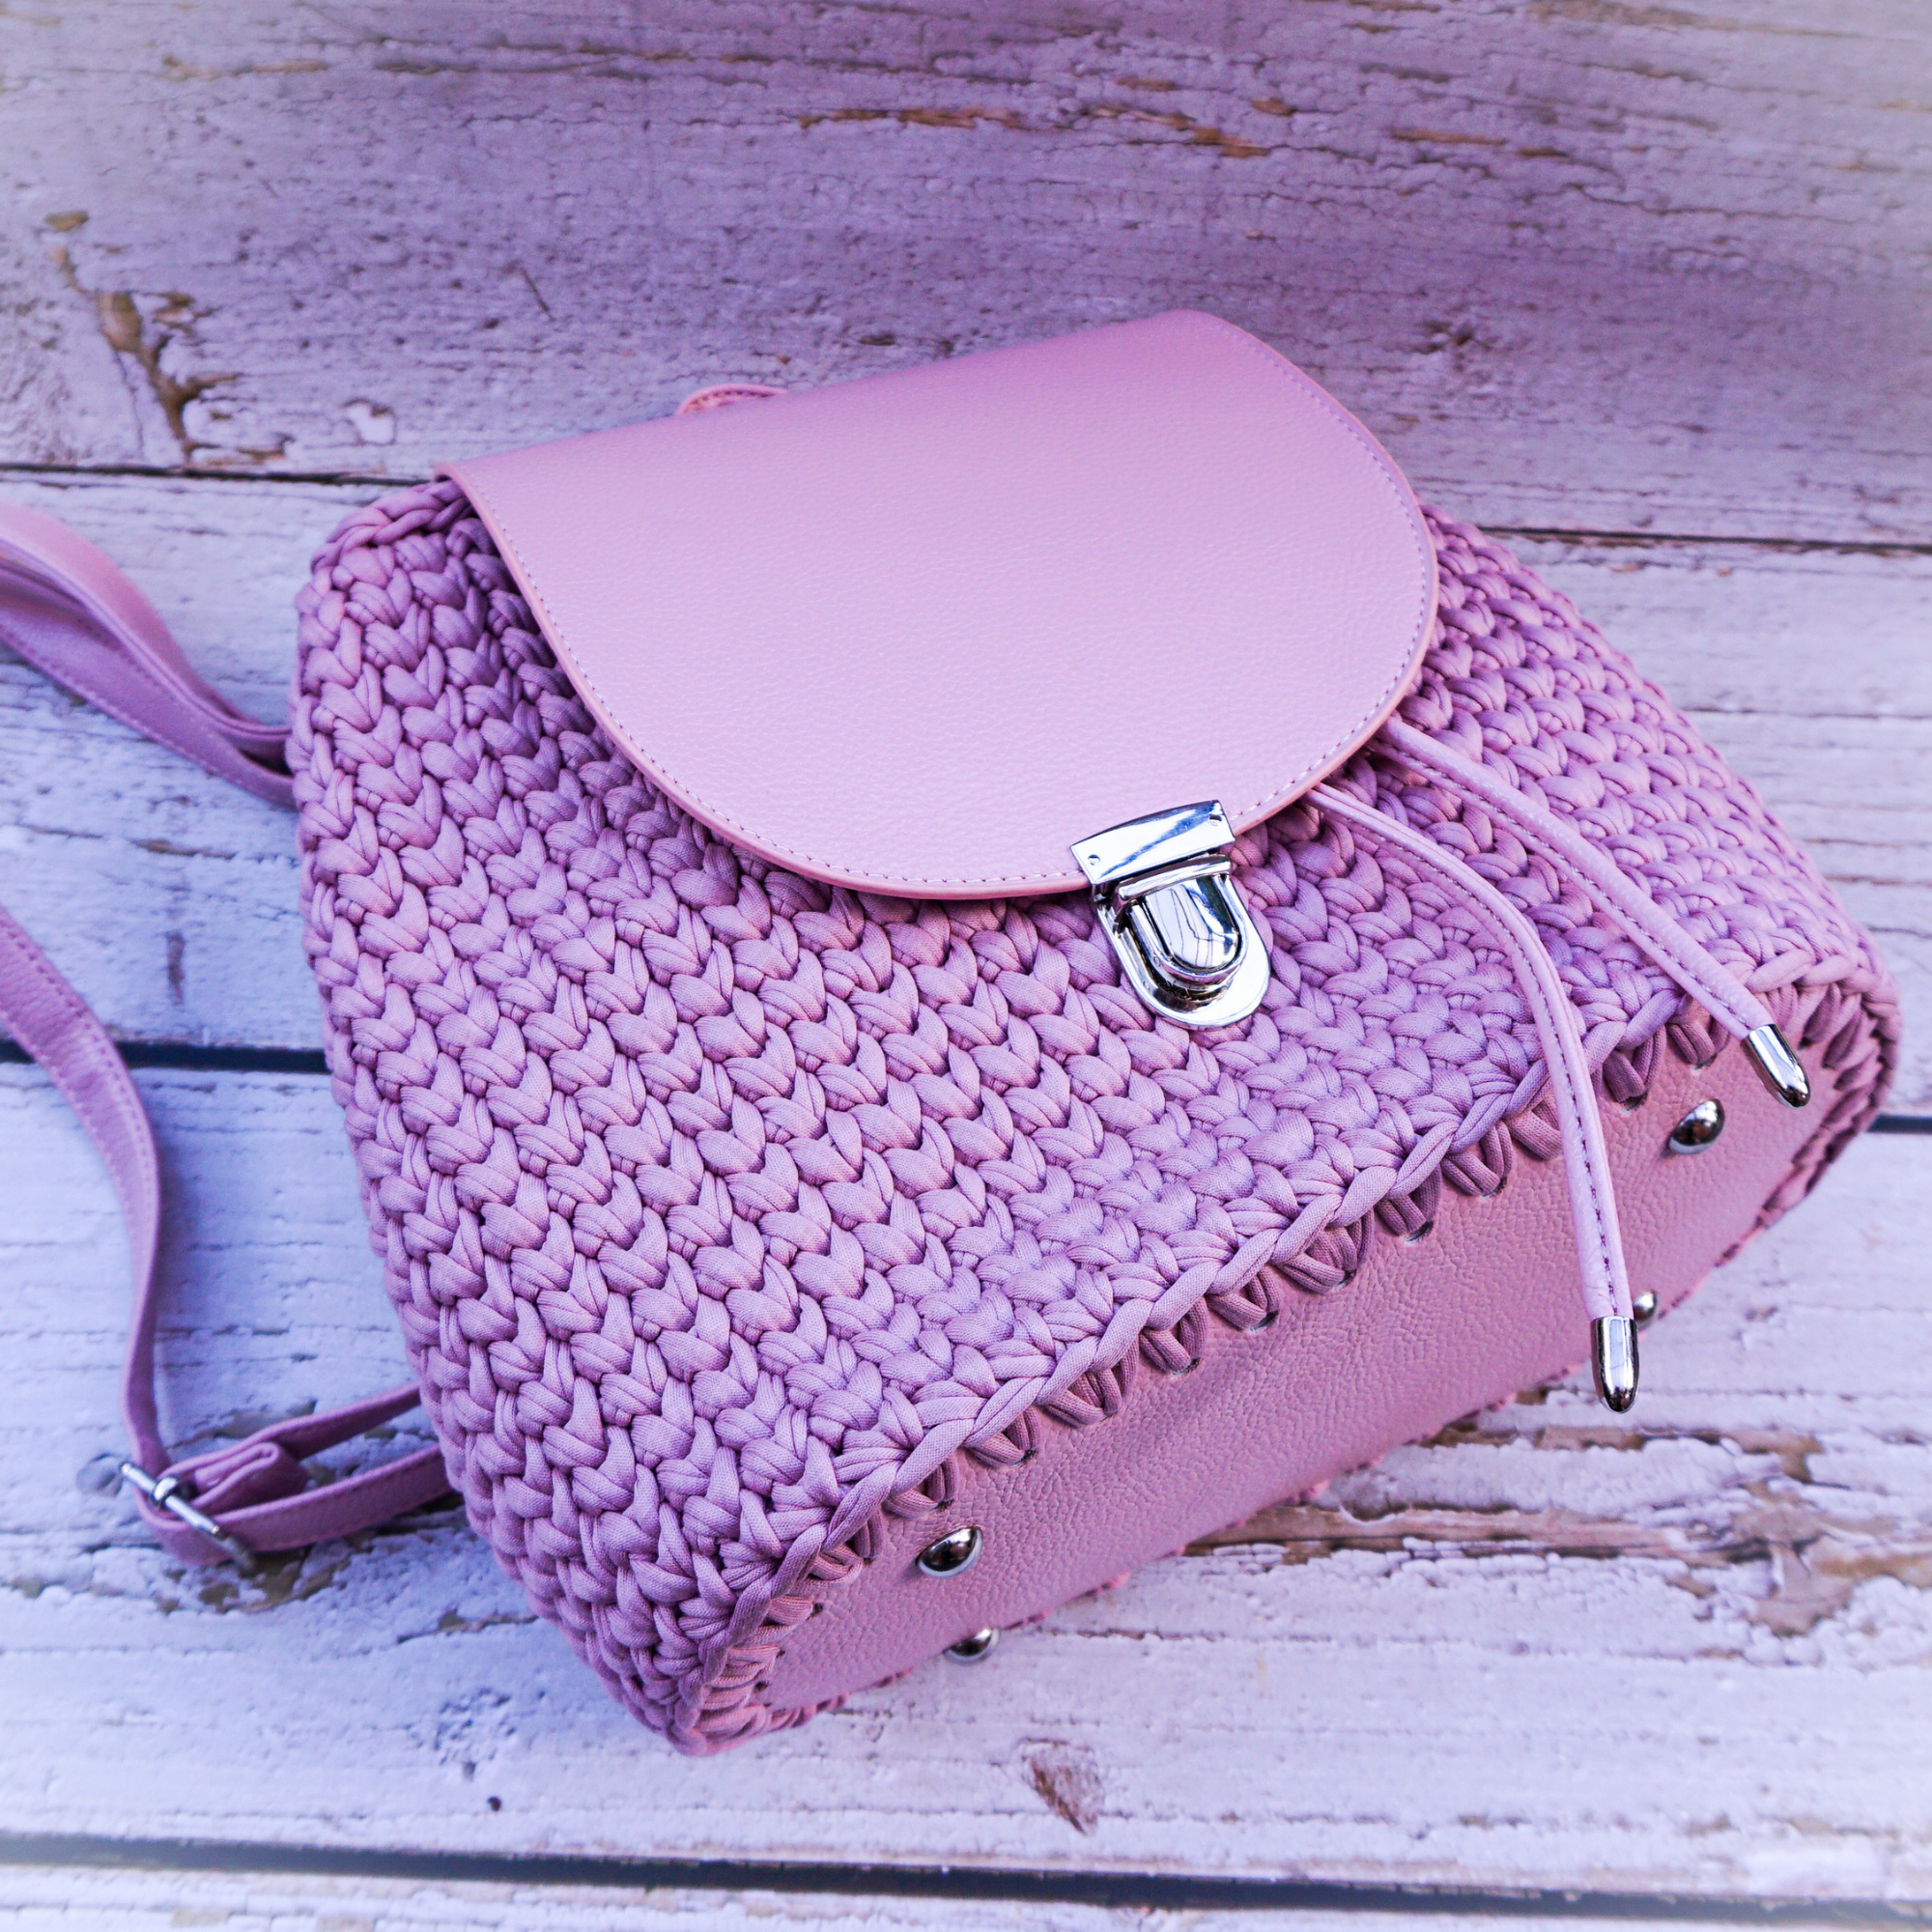 Crochet Backpack Kit with Leather Bag Base Accessories, Purse